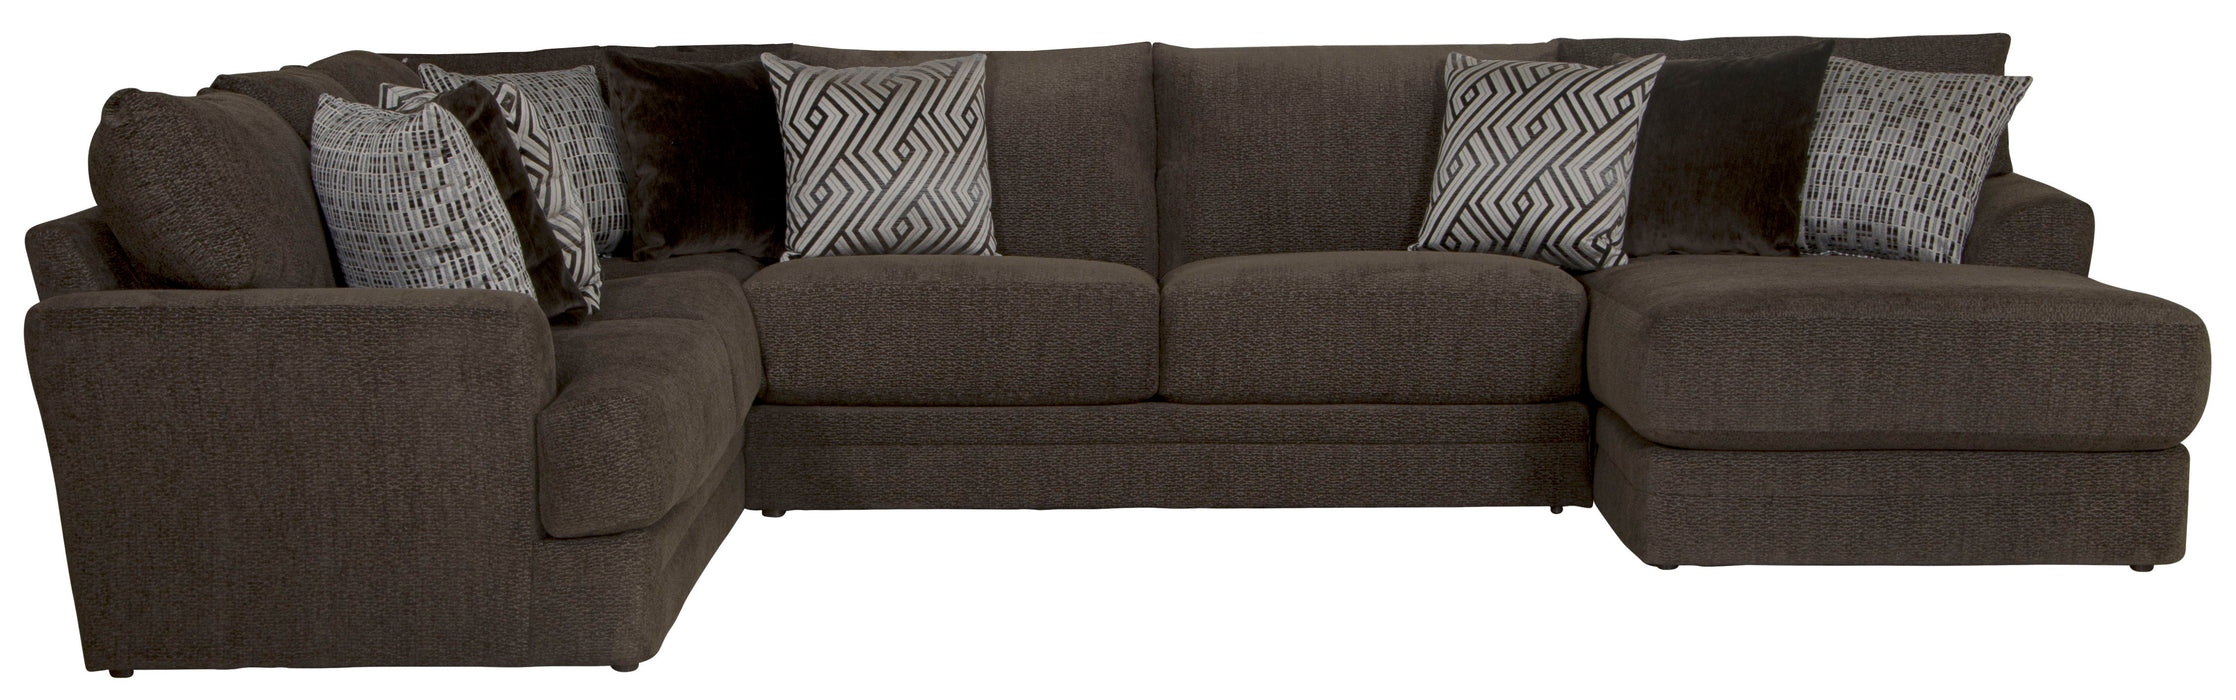 Galaxy - 3 Piece Sectional With RSF Chaise, Comfort Coil Seating And 9 Included Accent Pillows